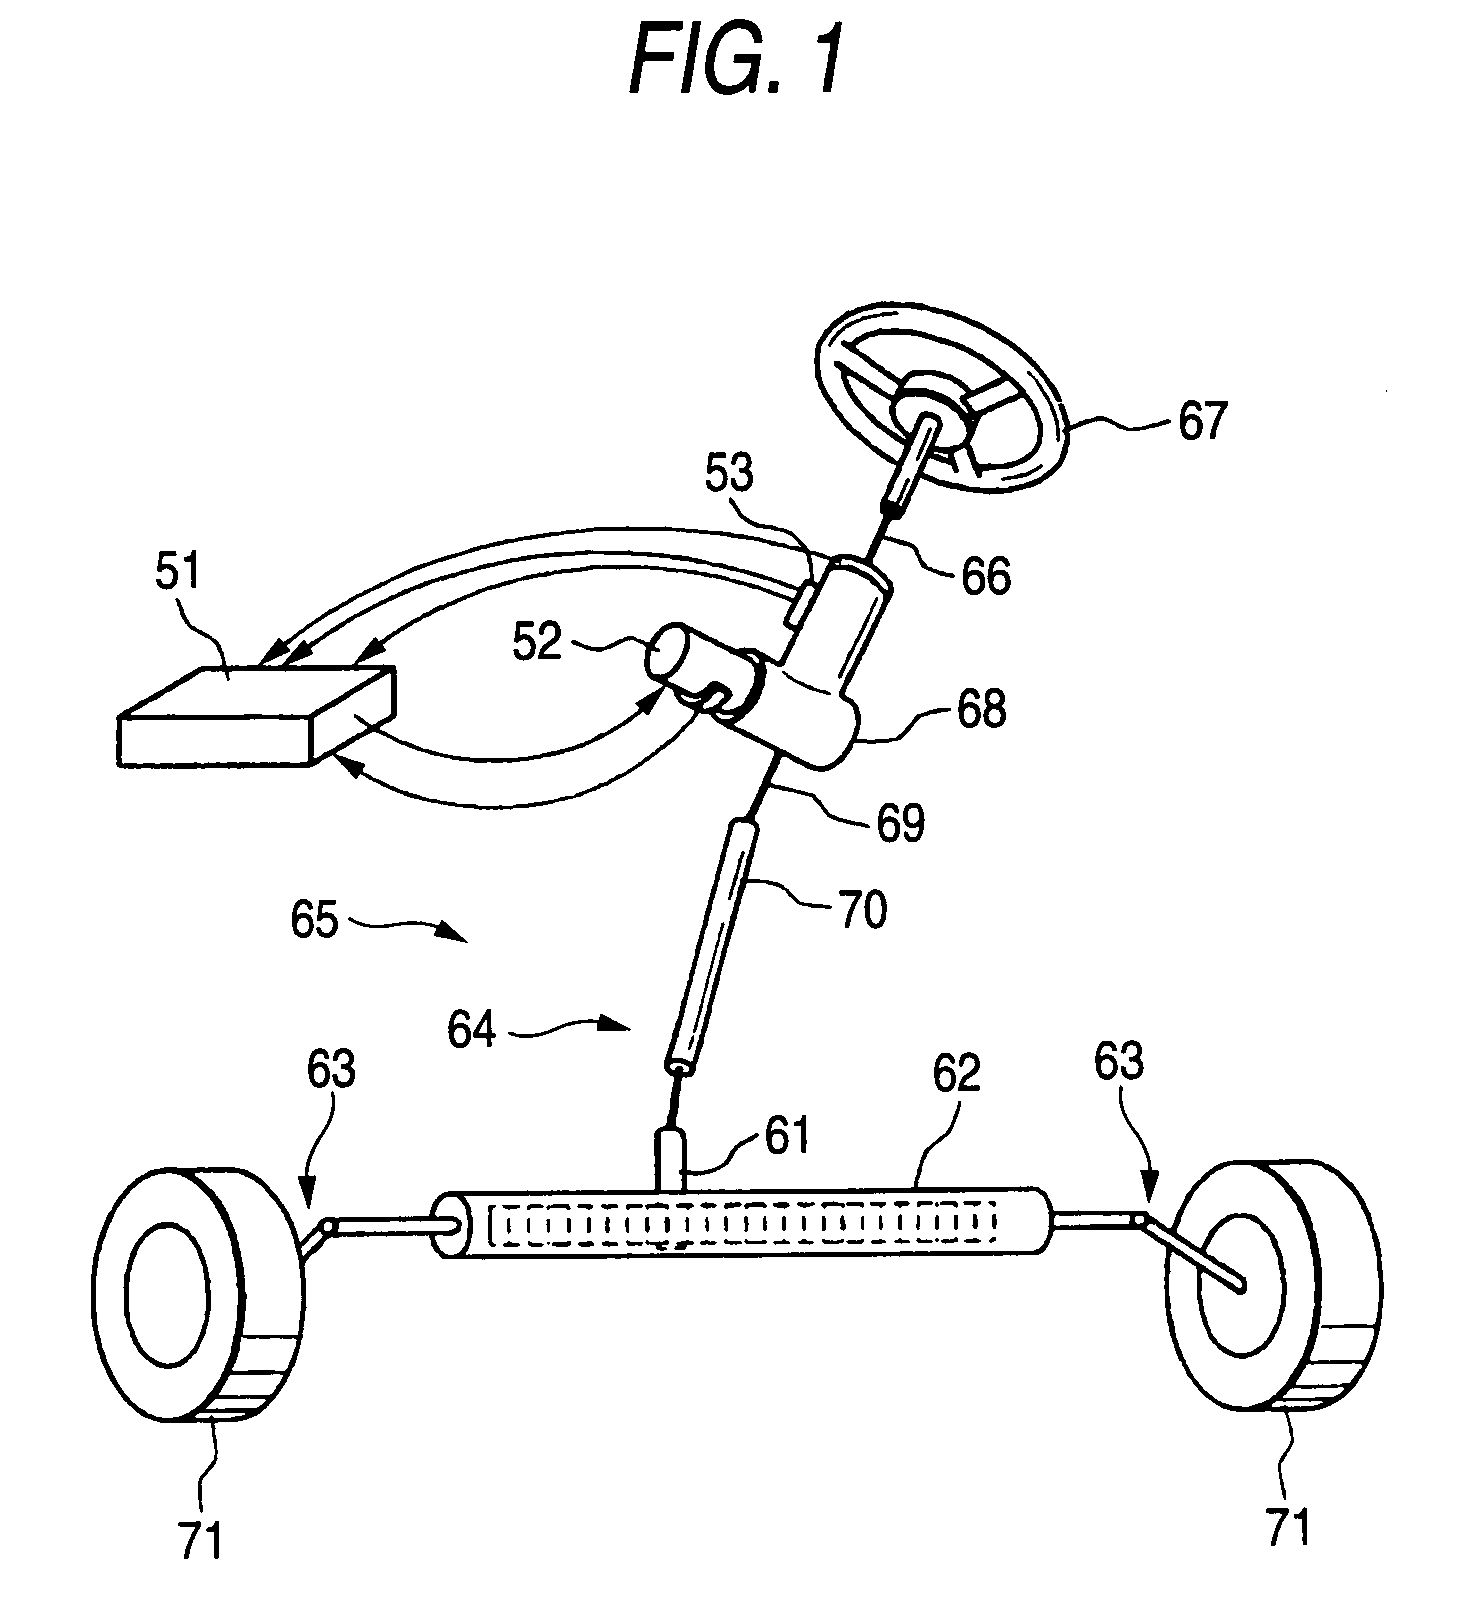 Motor and electric power steering system